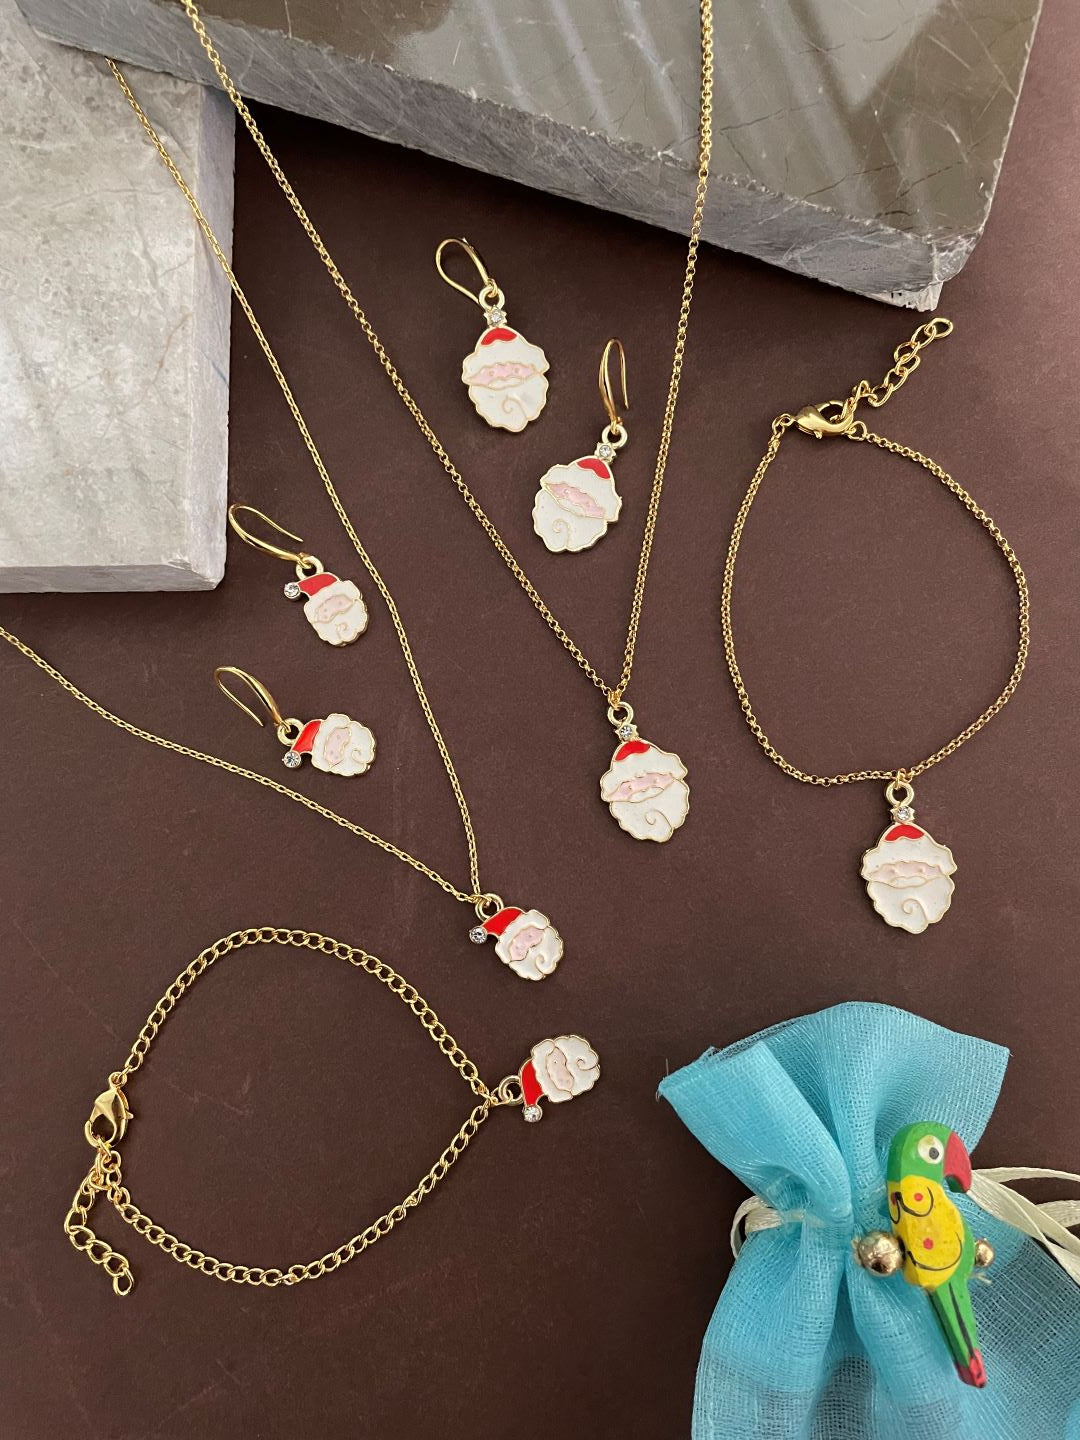 image for Christmas White & Red Santa Claus Pendant Necklace Earring and Bracelet Set